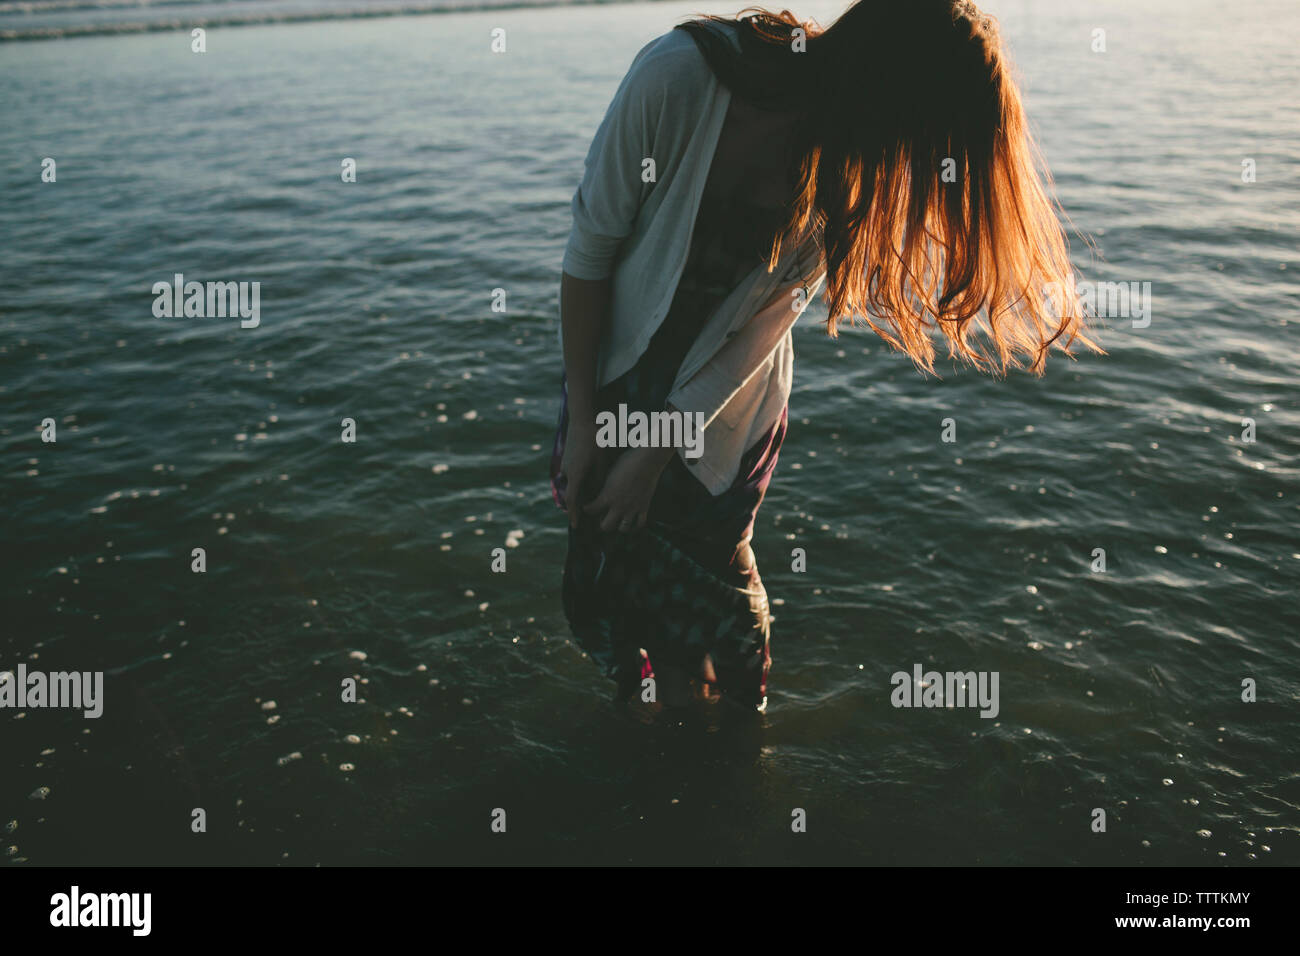 Woman with brown hair standing in sea Stock Photo